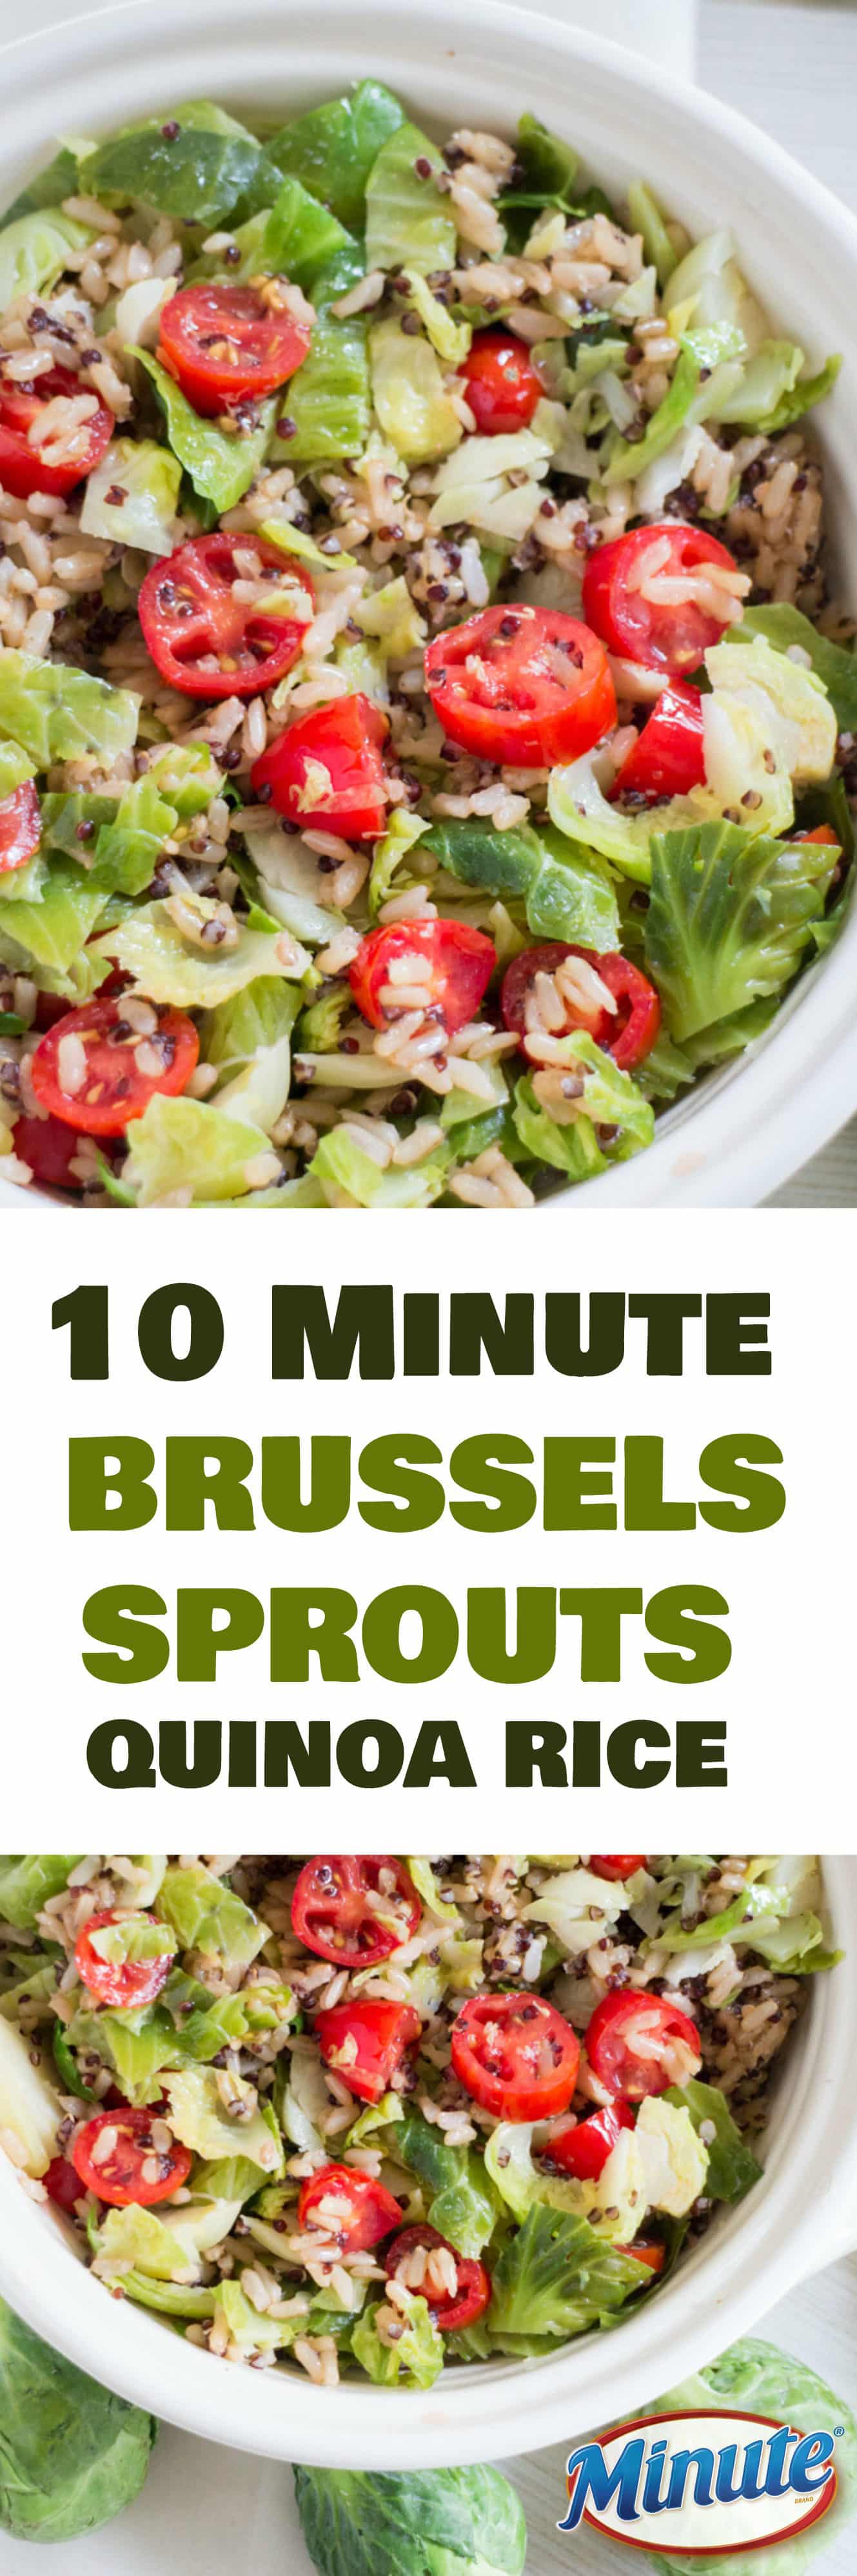 10 MINUTE Brussels Sprouts Quinoa Rice dish! This EASY clean eating recipe is made with Minute Rice and served with fresh Brussels Sprouts and cherry tomatoes! This healthy meal is gluten free and vegetarian - make it for a work lunch or easy dinner!